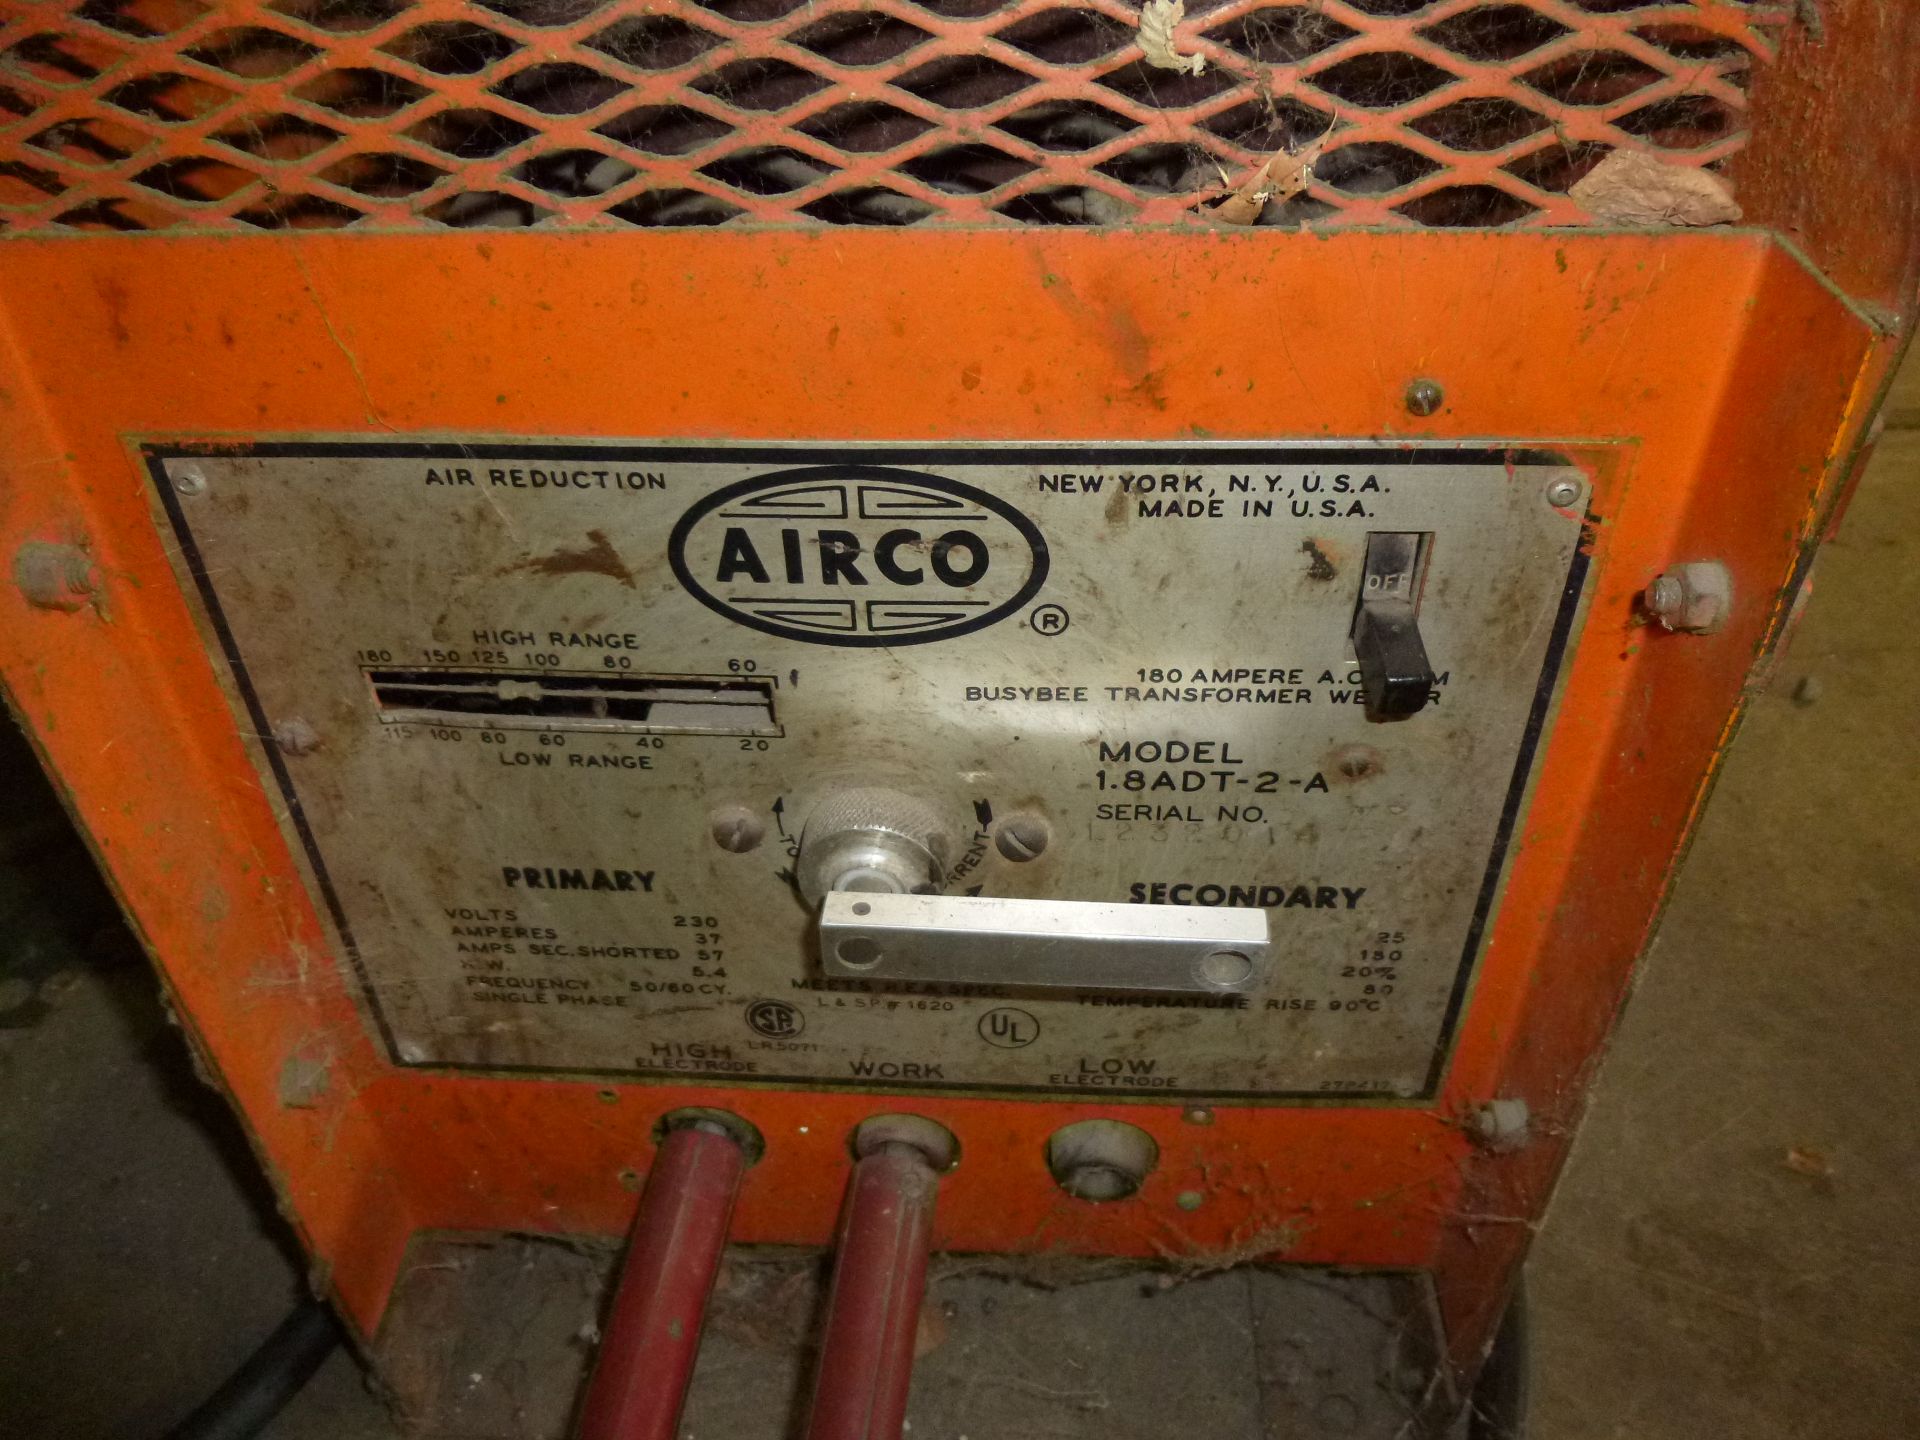 Airco Welder model 1.8ADT-2-A (located at 52458 St Rd 15 North, Bristol IN 46507) - Image 2 of 4